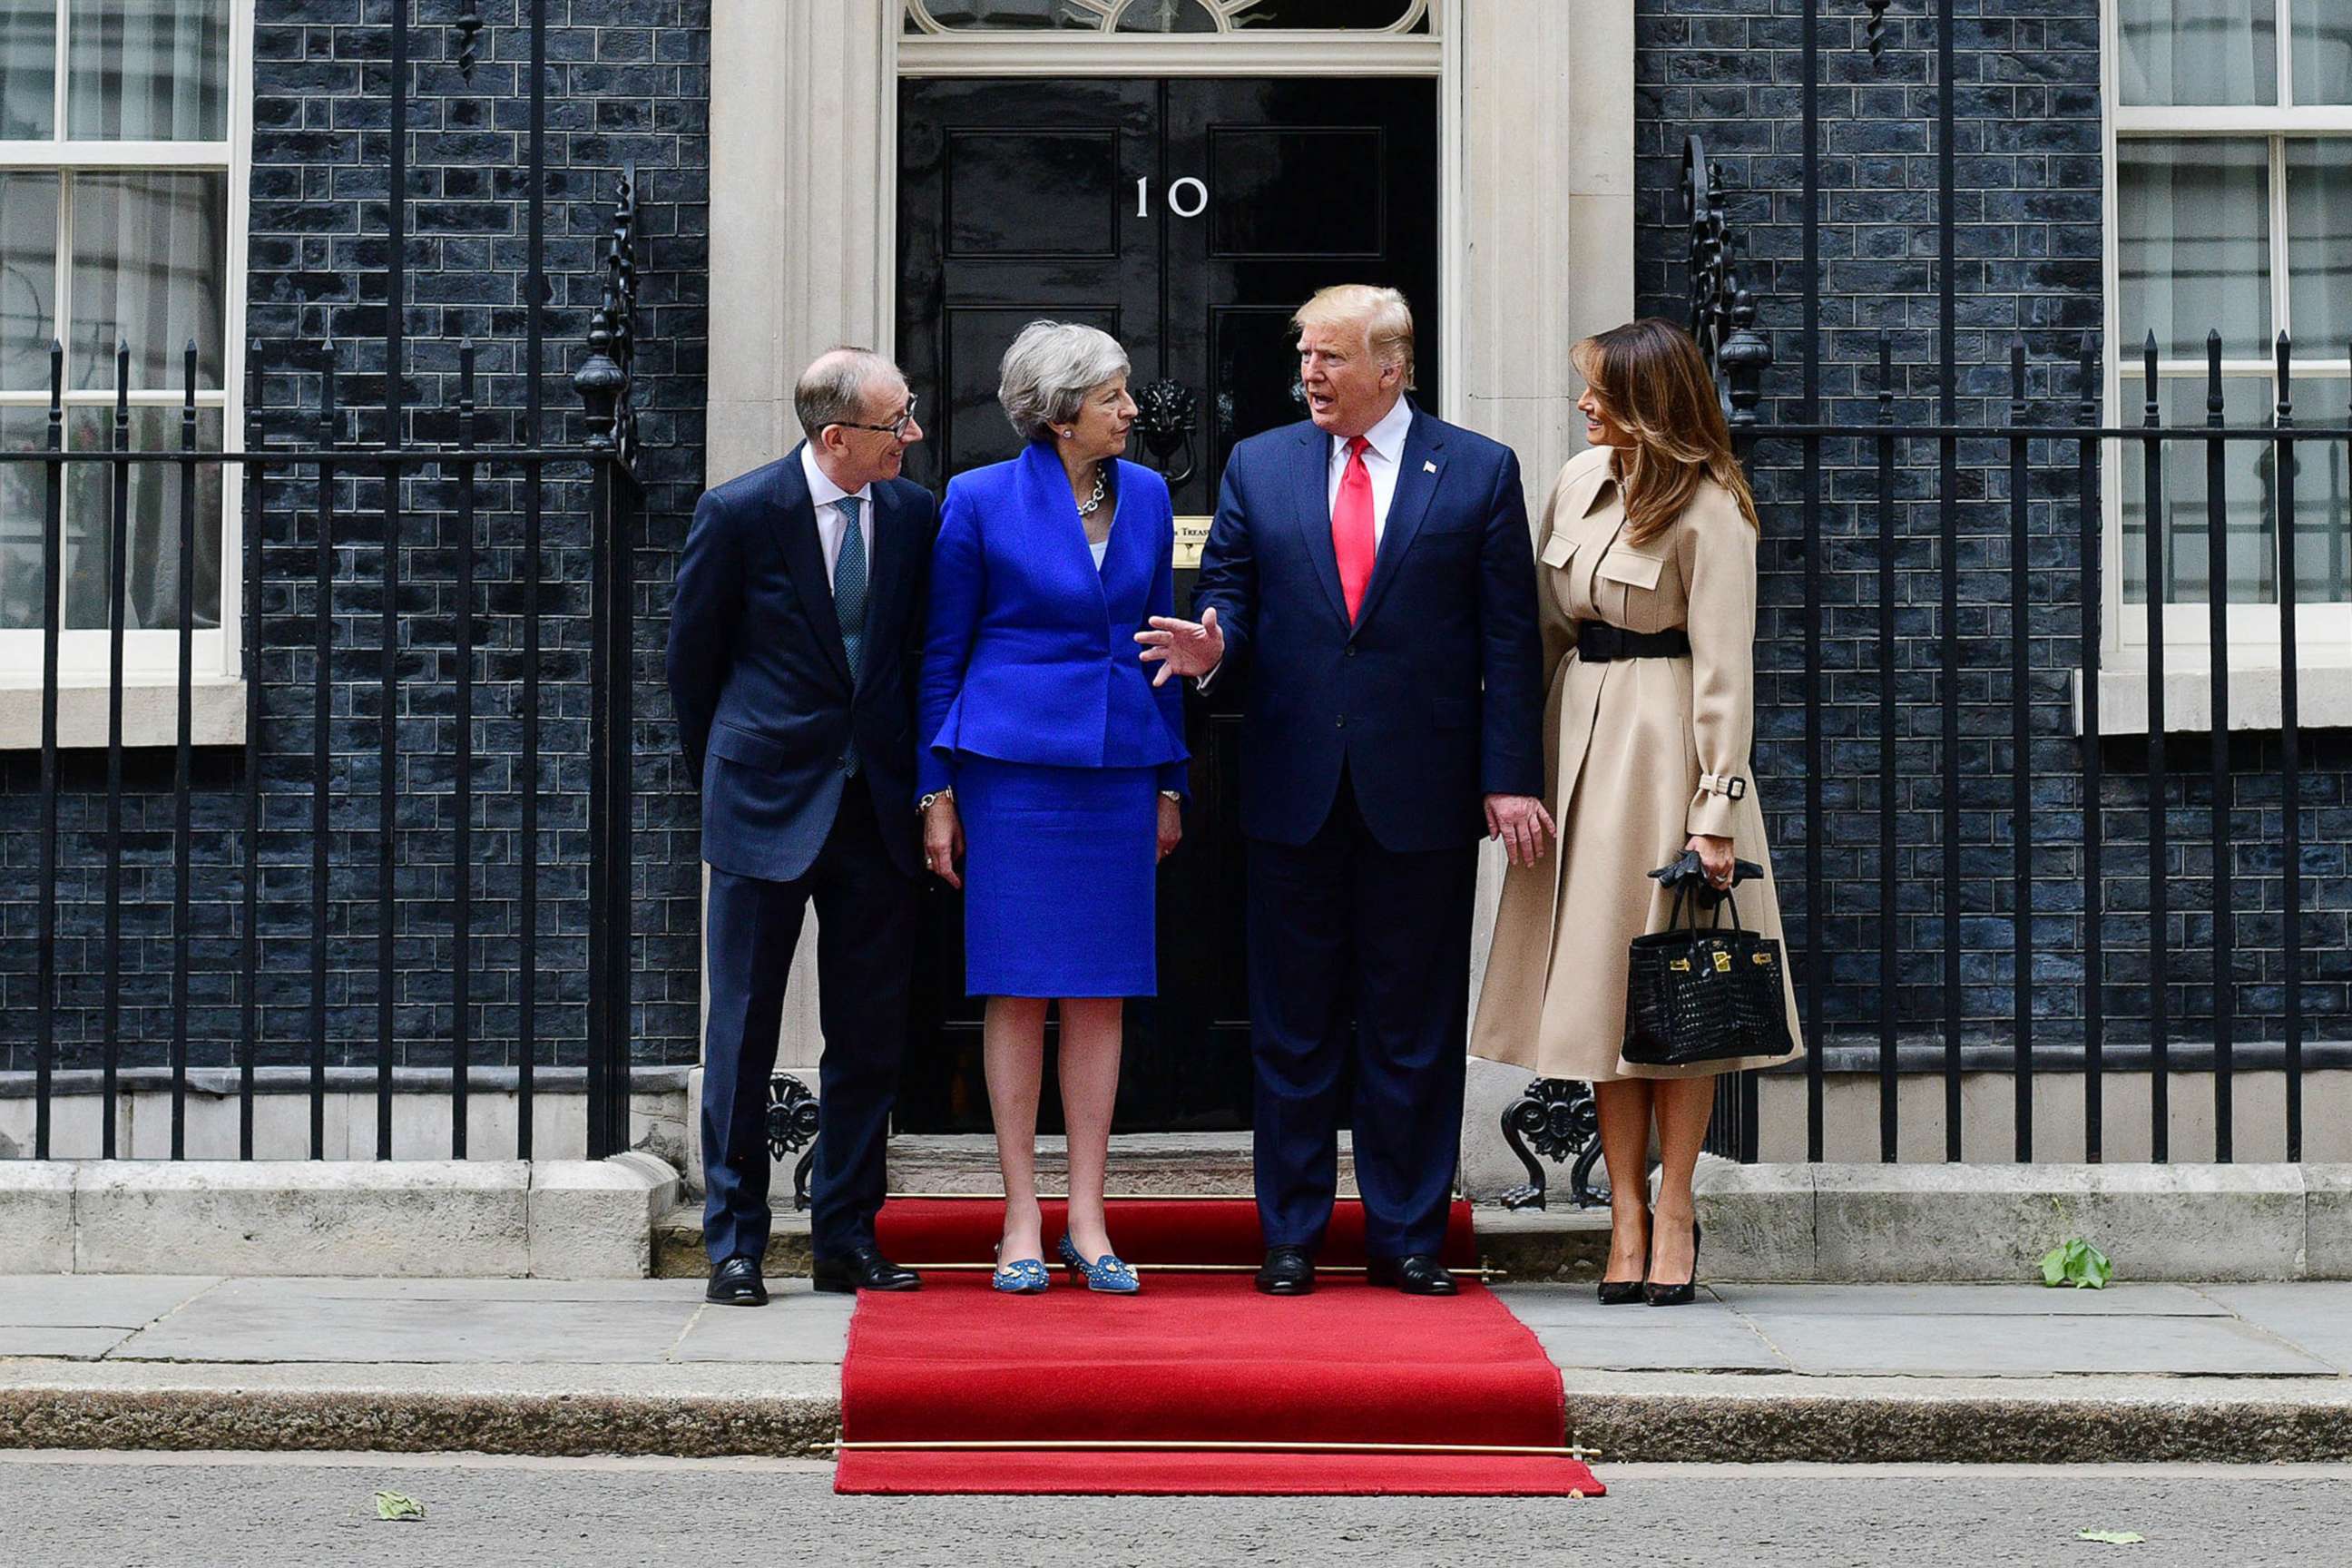 PHOTO: Prime Minister Theresa May and husband Philip May welcome President Donald Trump and first lady Melania Trump to 10 Downing Street, during the second day of his State Visit, June 4, 2019, in London.